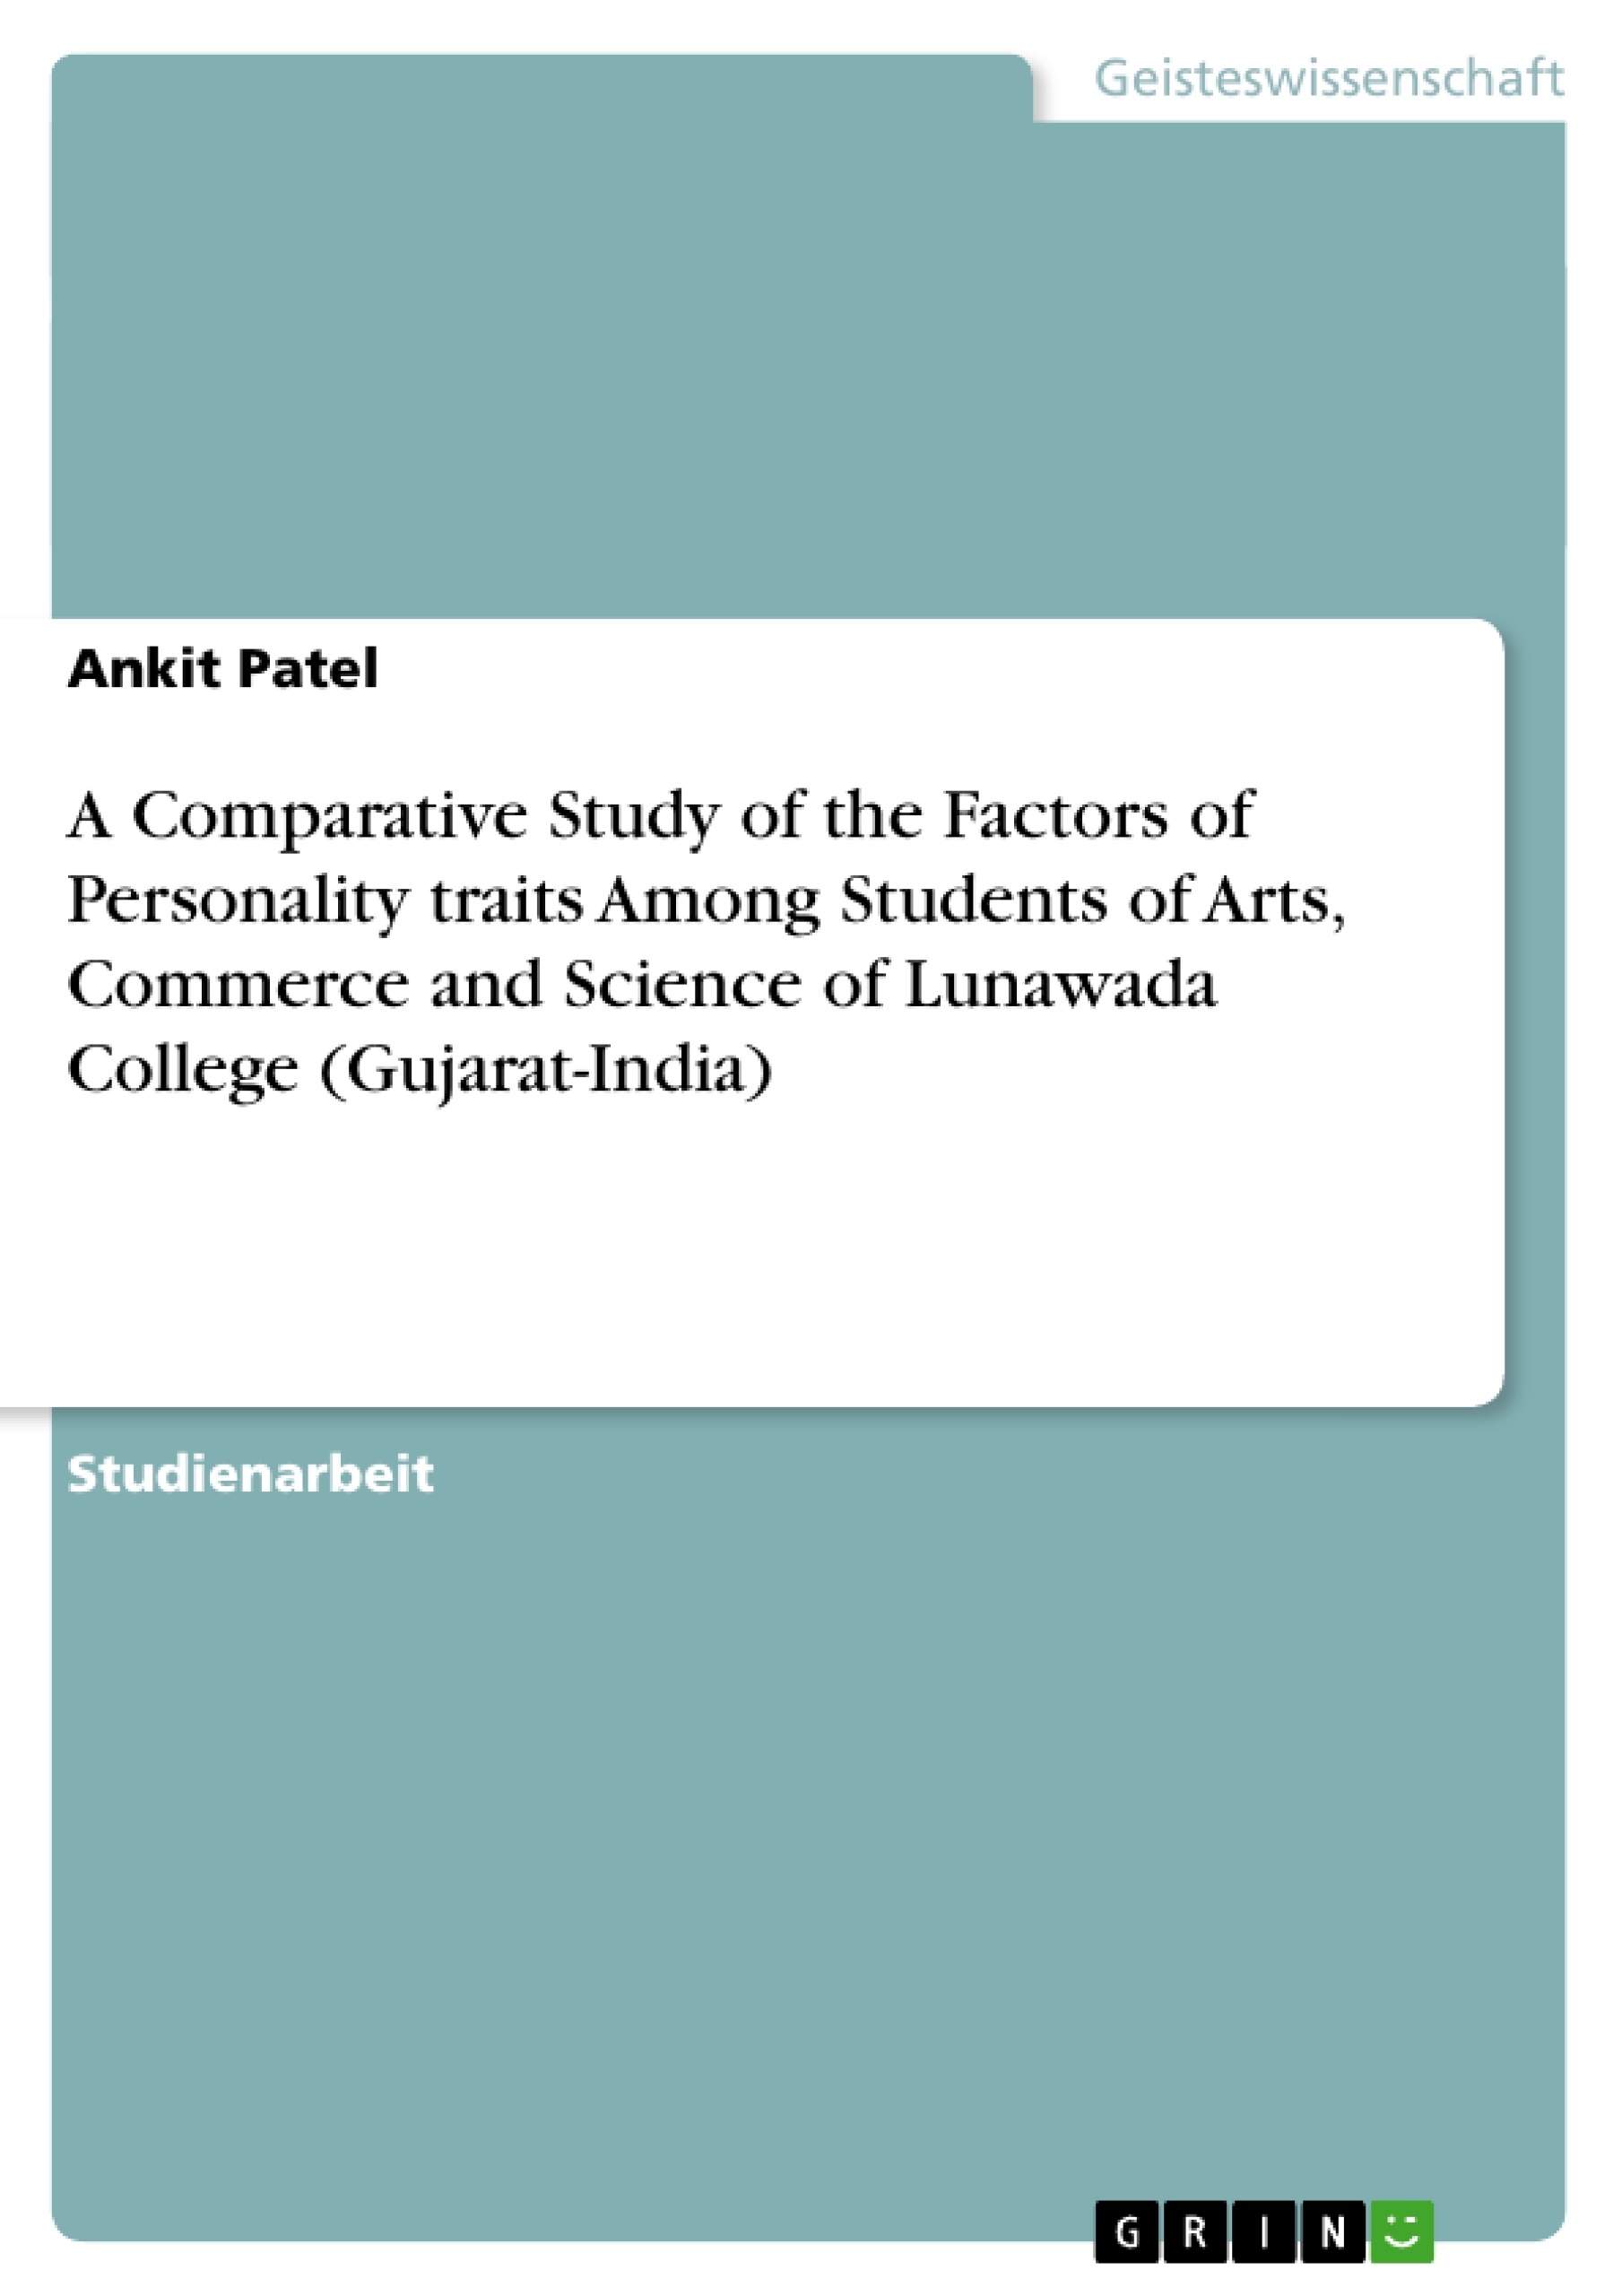 Titre: A Comparative Study of the Factors of Personality traits Among Students of Arts, Commerce and Science of Lunawada College (Gujarat-India)